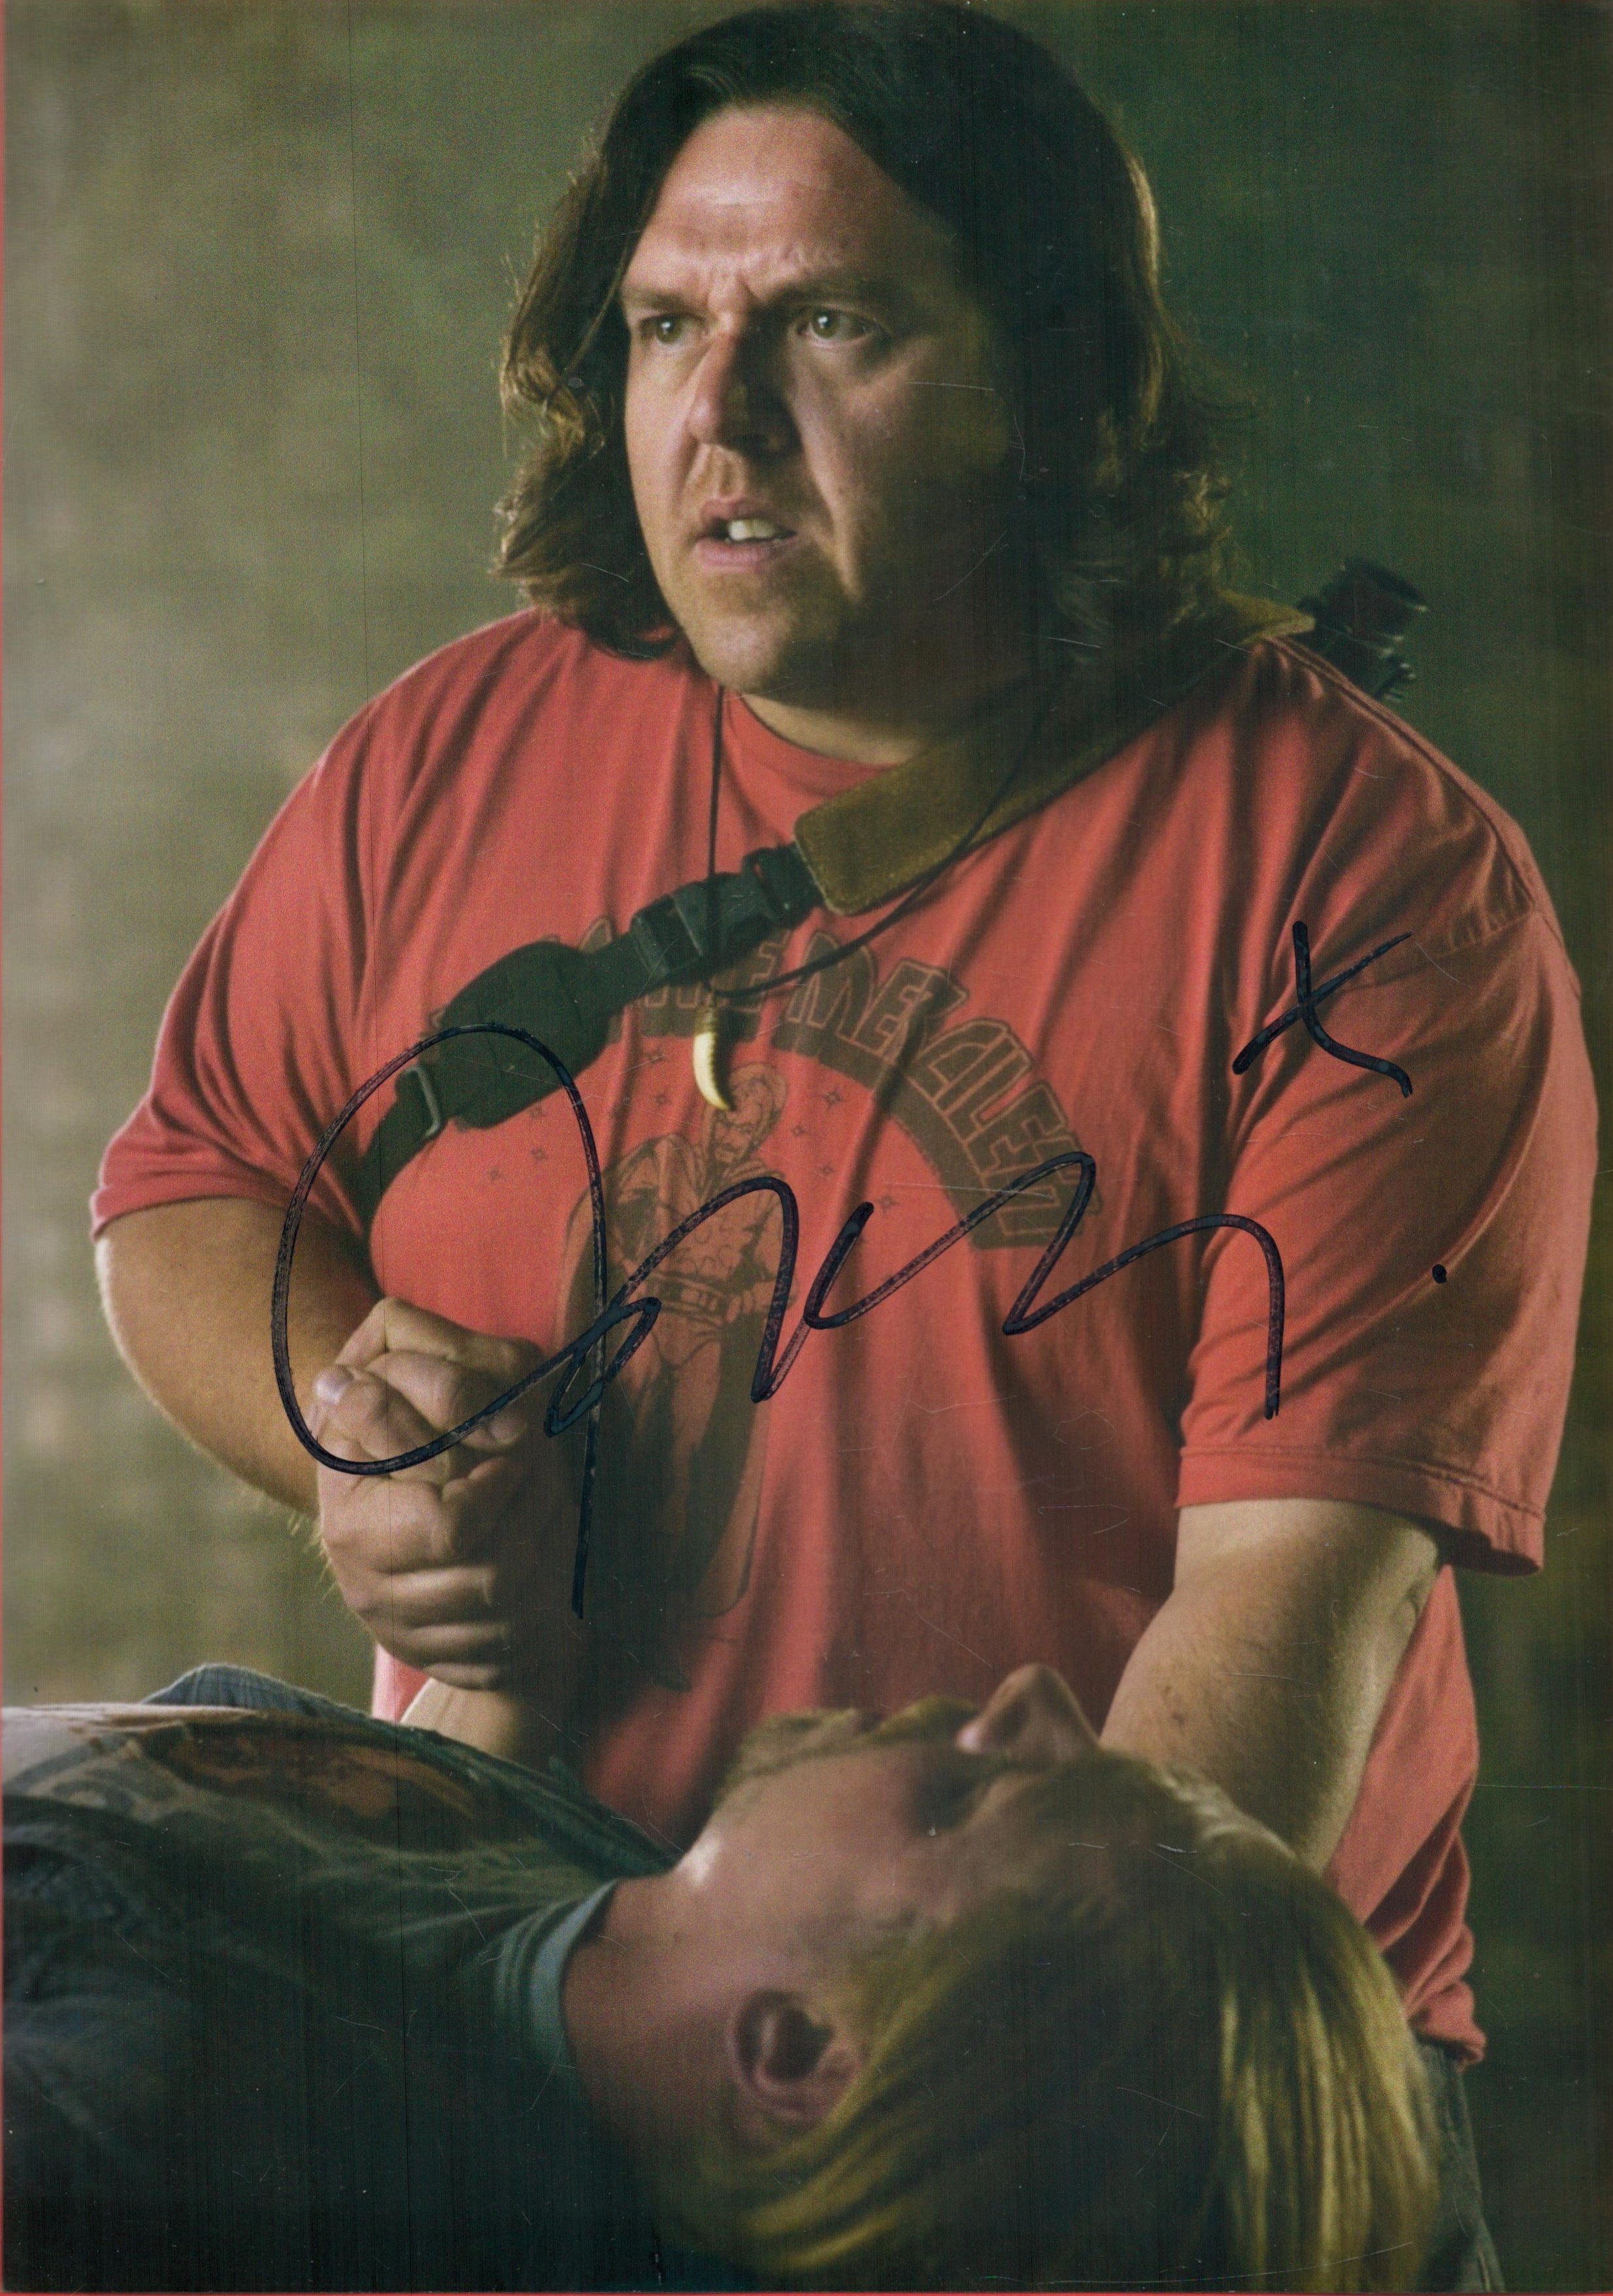 Nick Frost Signed 12x8 inch Colour Photo. Signed in black ink. Nicholas John Frost (born 28 March